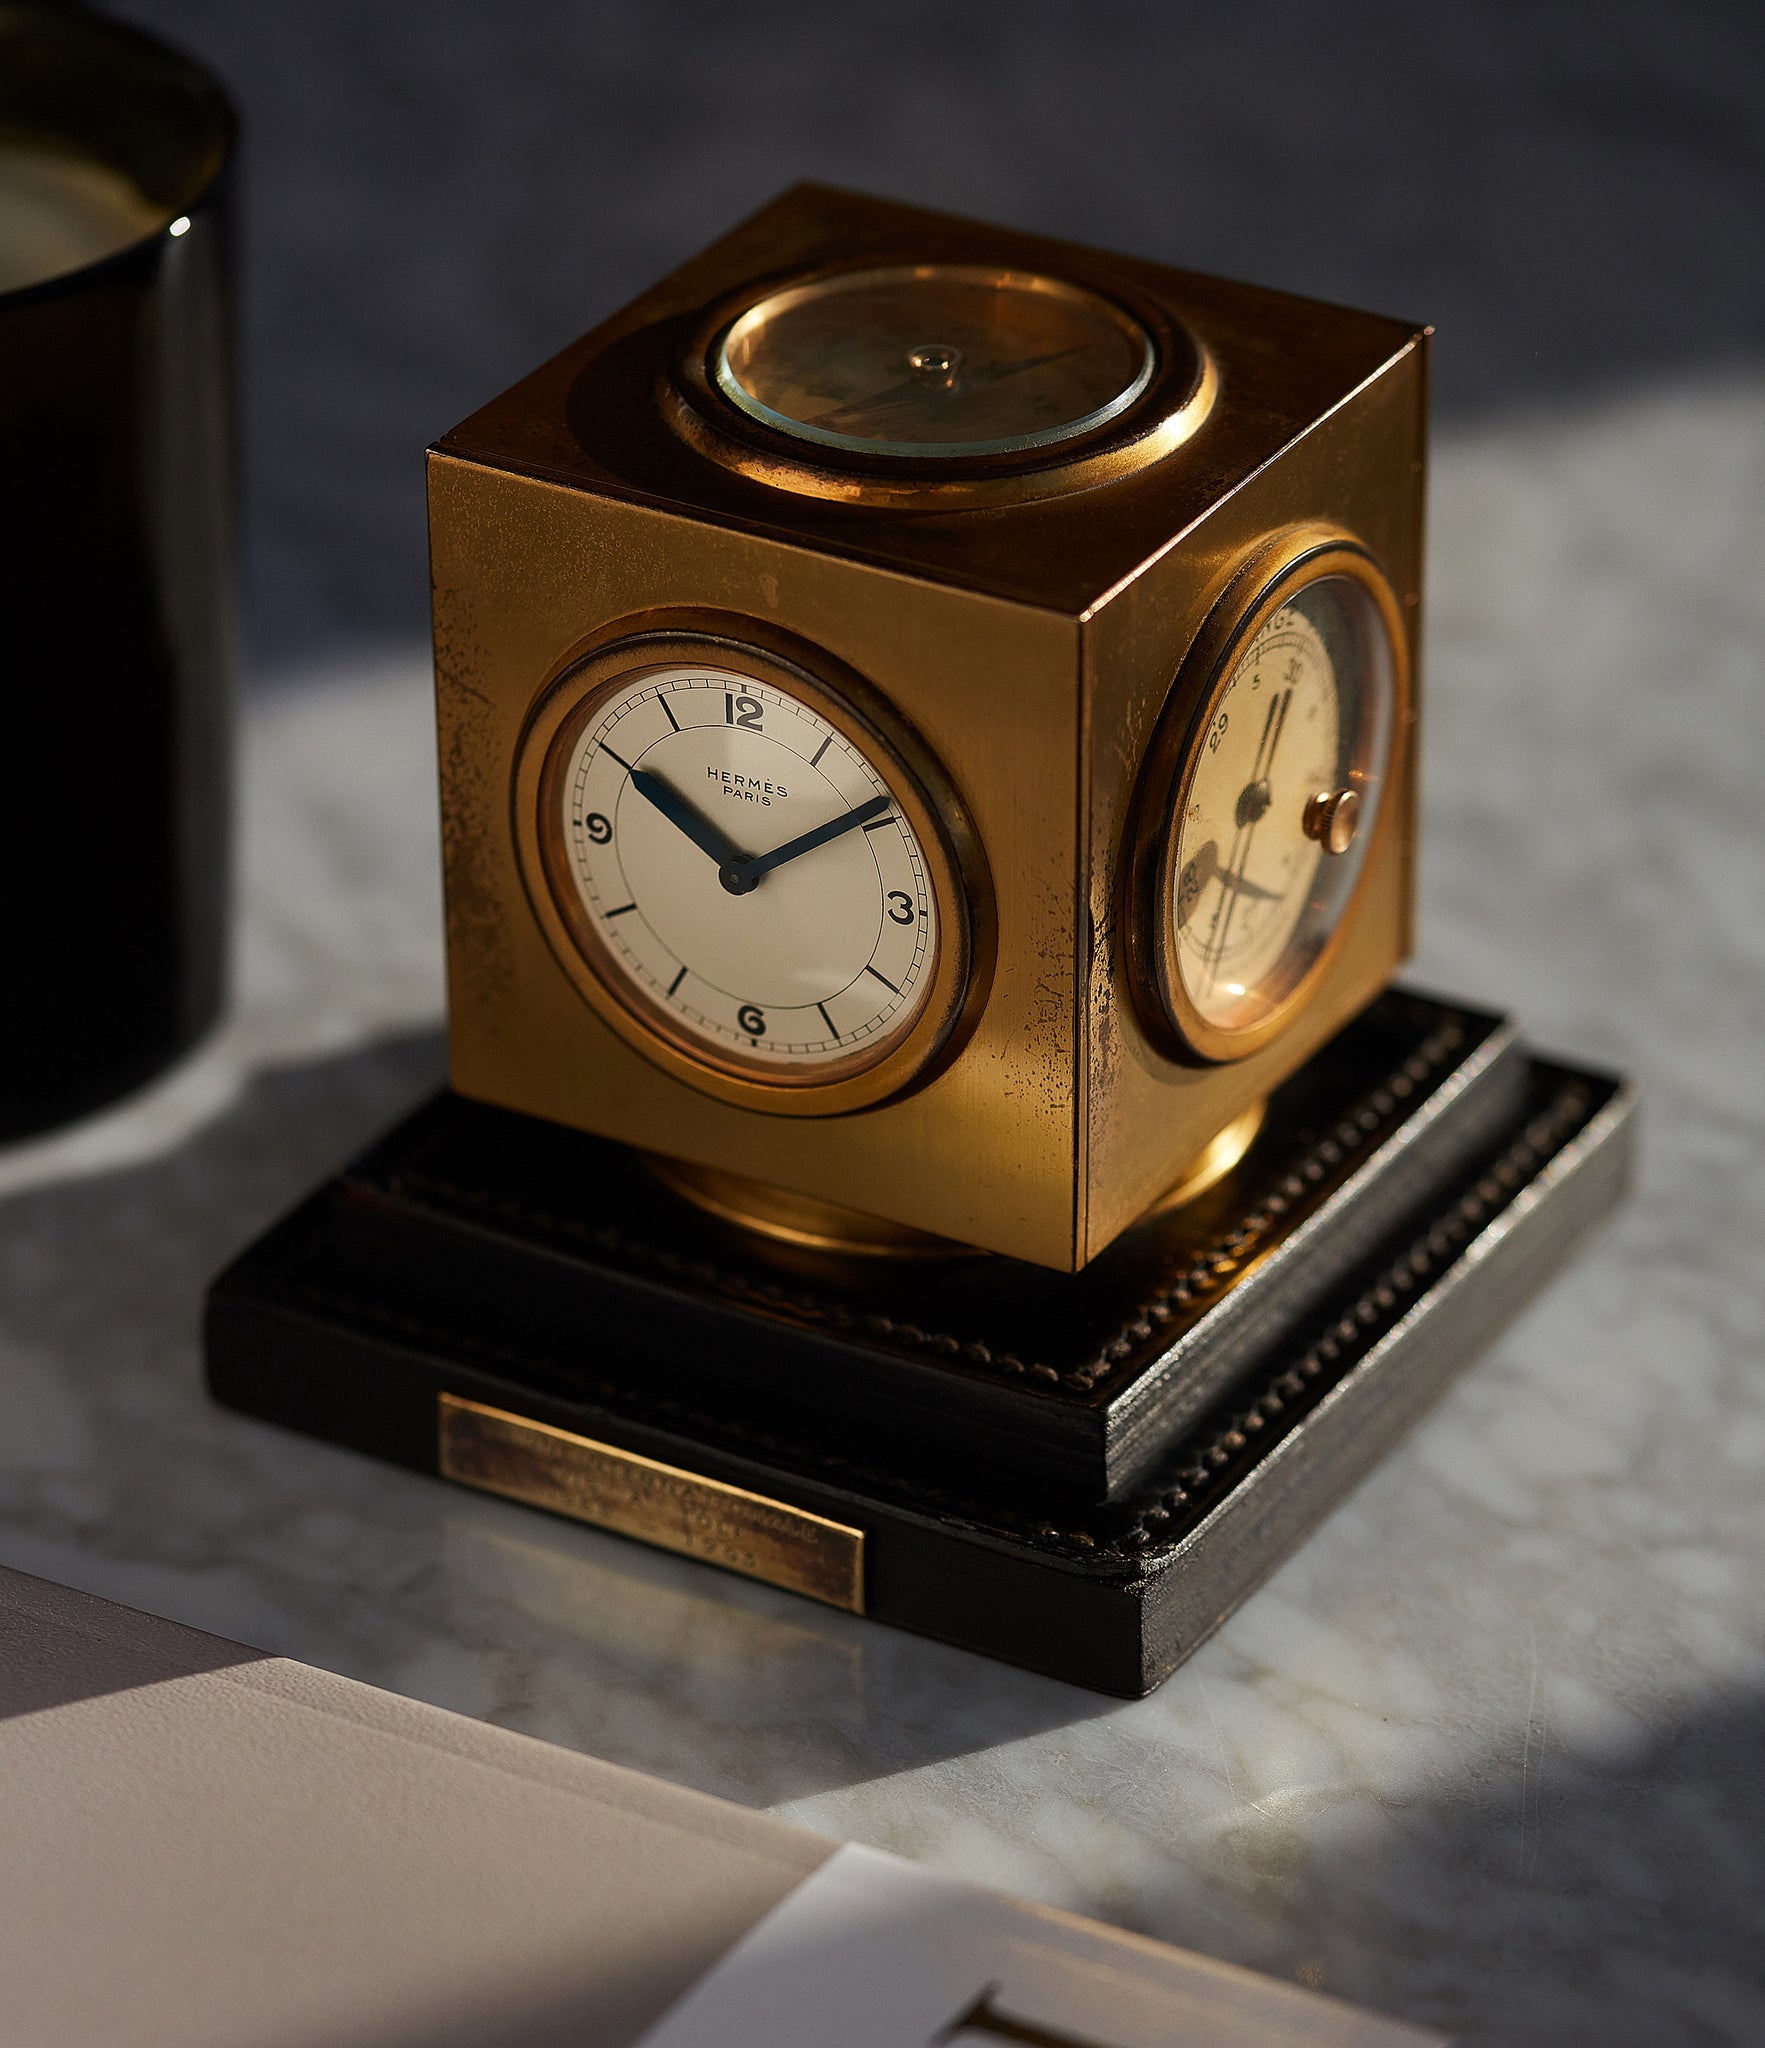 cool vintage object Hermes Paris Compendium 8-day Art Deco brass calendar desk clock for sale online at A Collected Man for collectors of rare objects